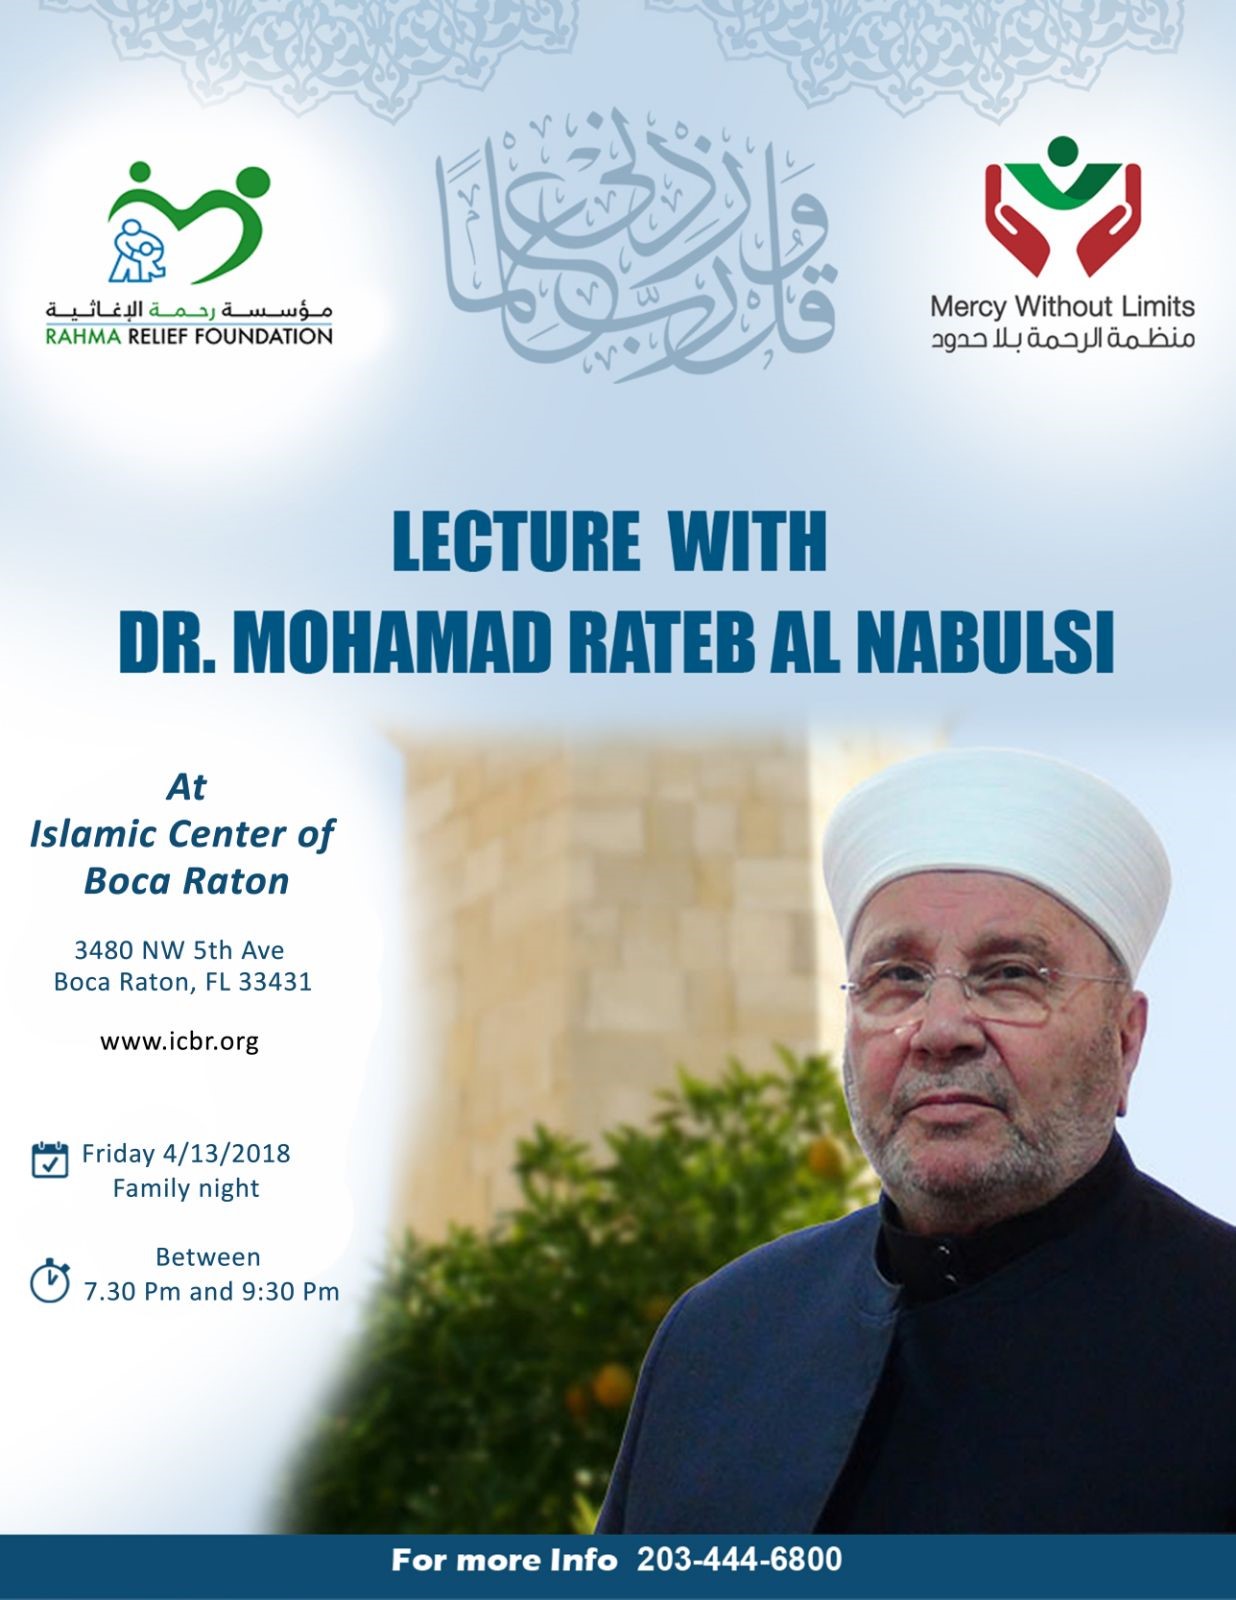 Dr. Rateb Al Nabulsi is giving Friday khutbah and lecture at ICBR